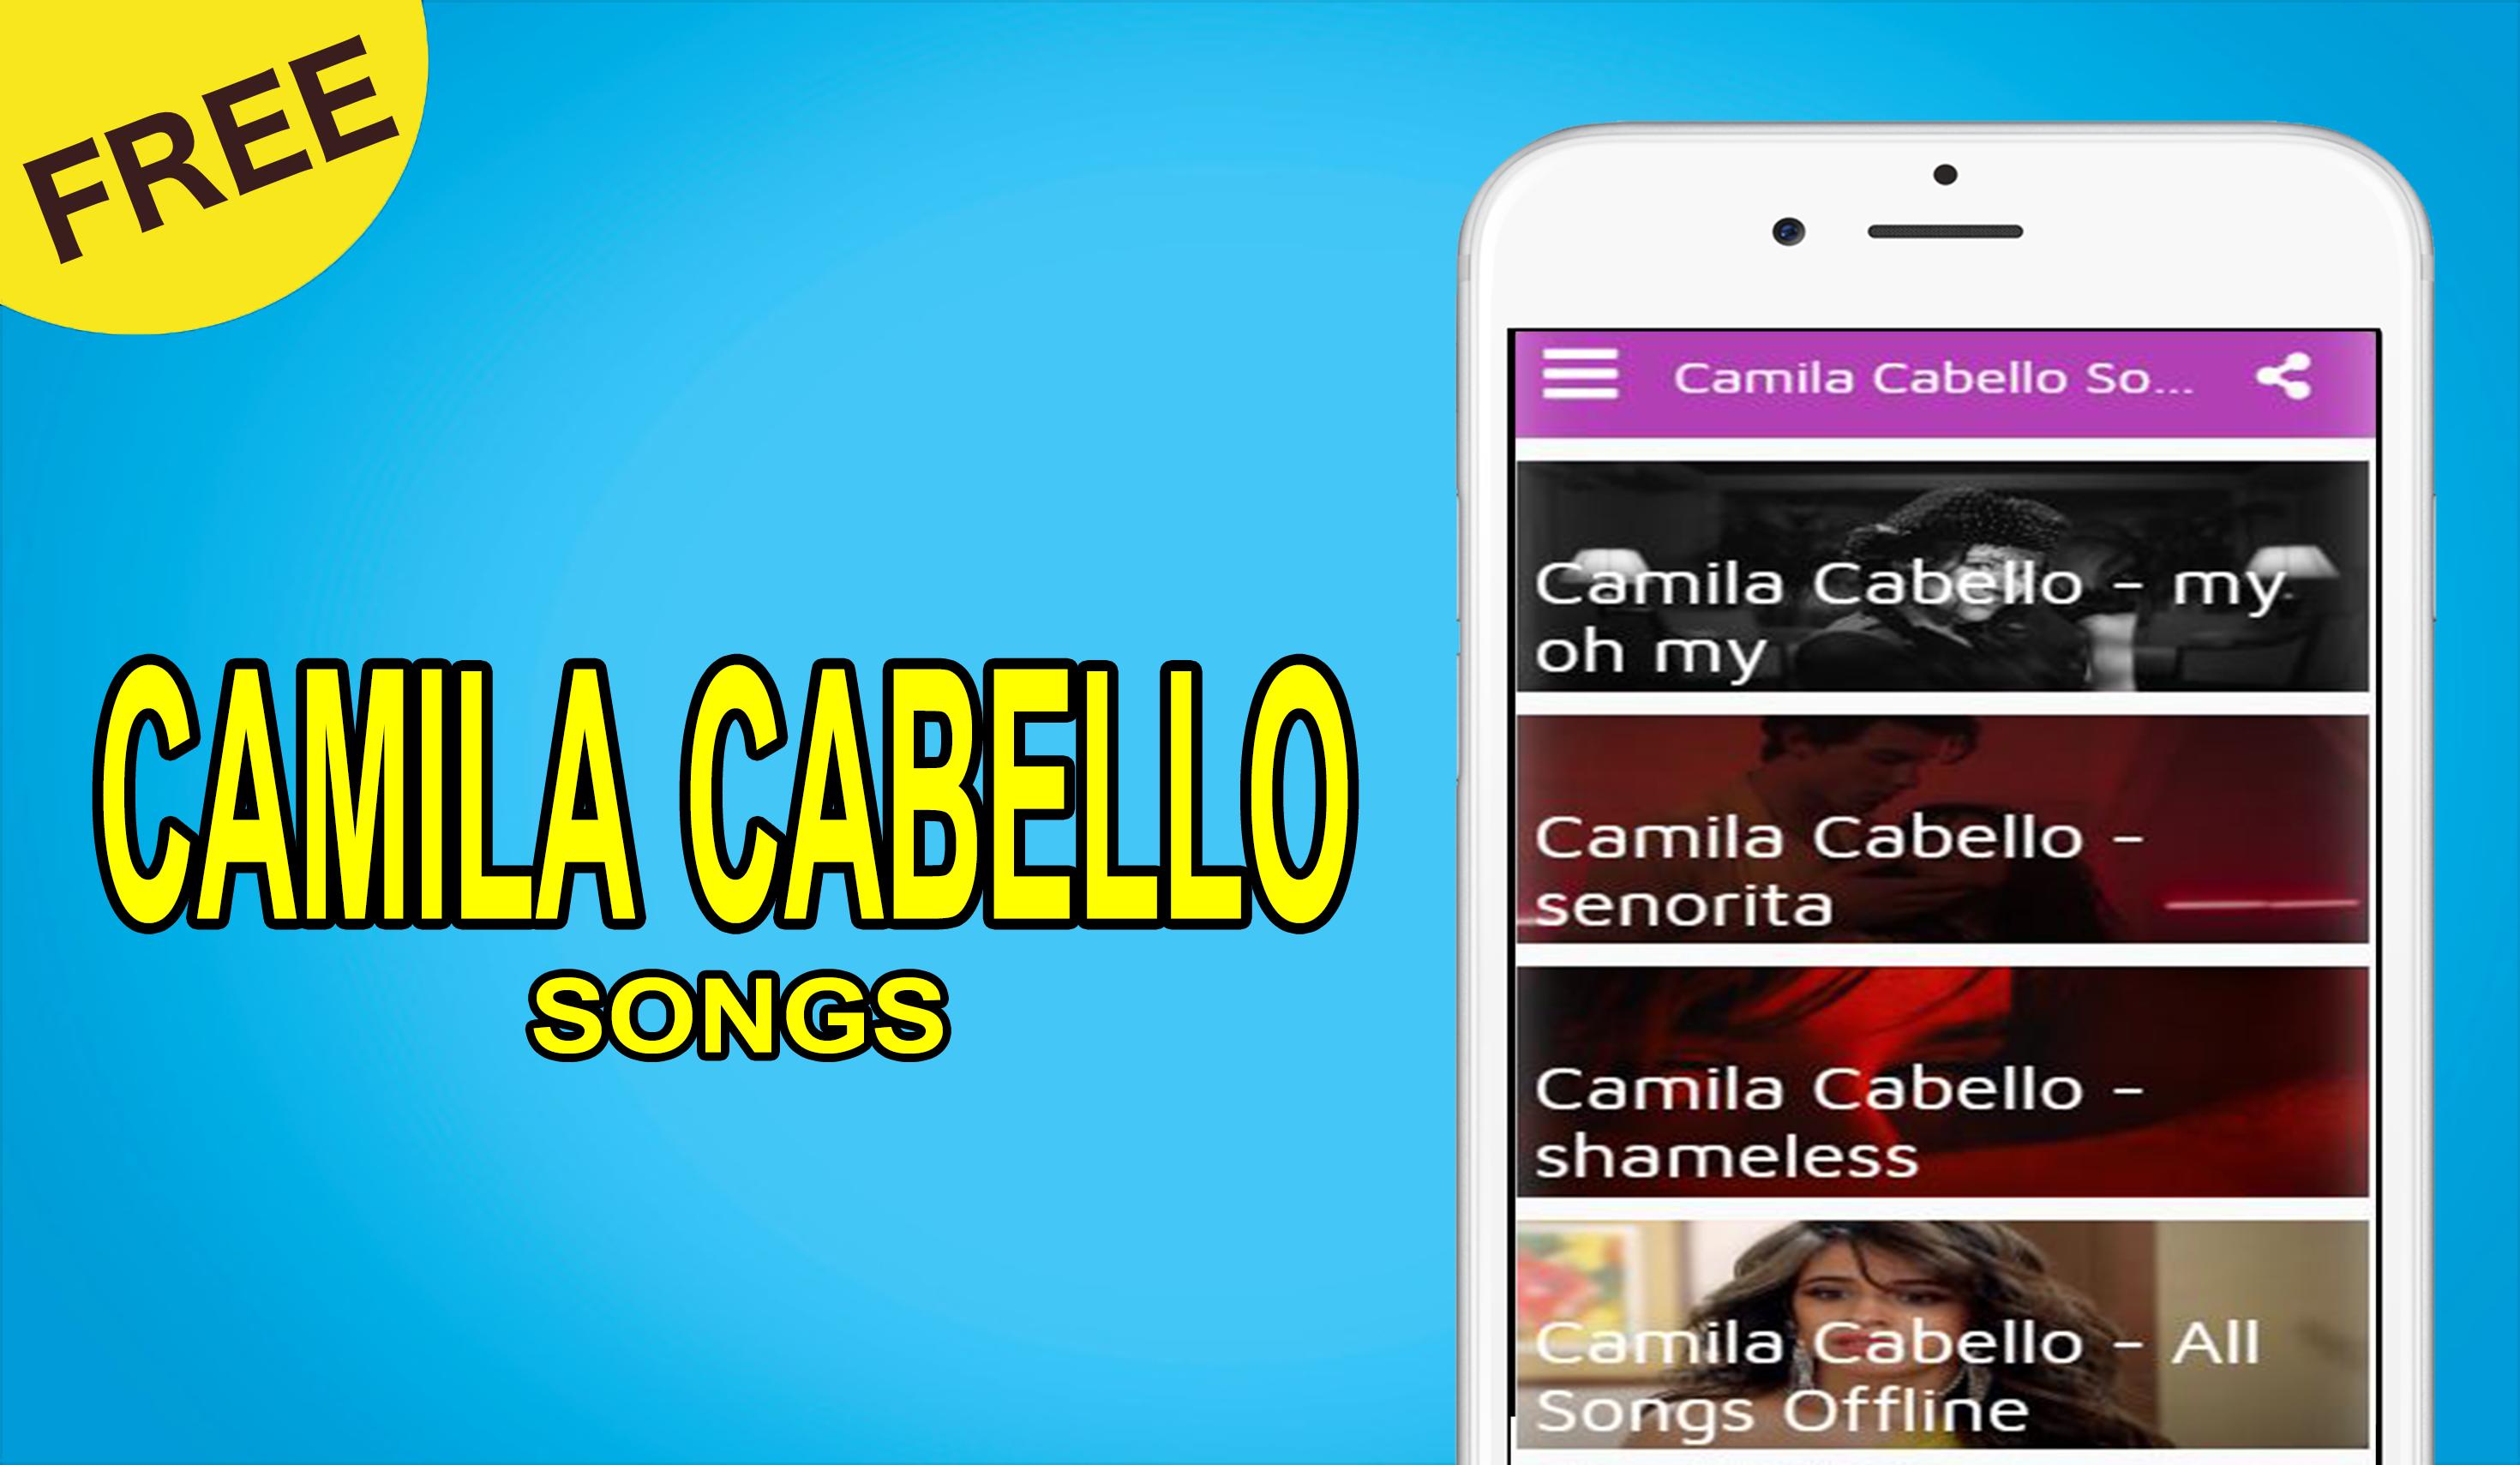 Camila Cabello Songs Offline Music Ringtones Free for Android - APK Download